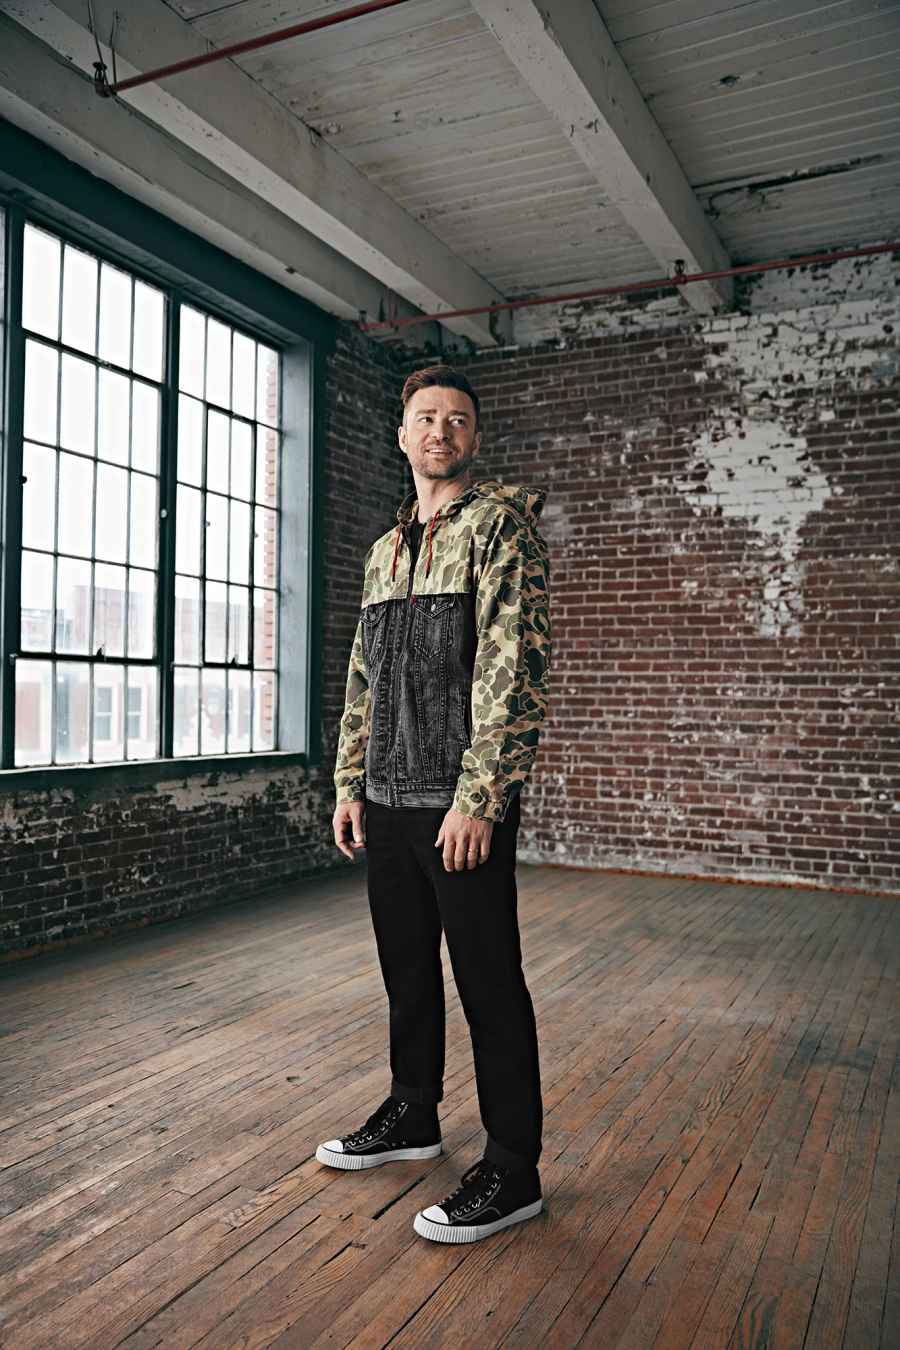 Justin Timberlake Celebrates His Memphis Roots With His Spring 2019 Levi's Collection